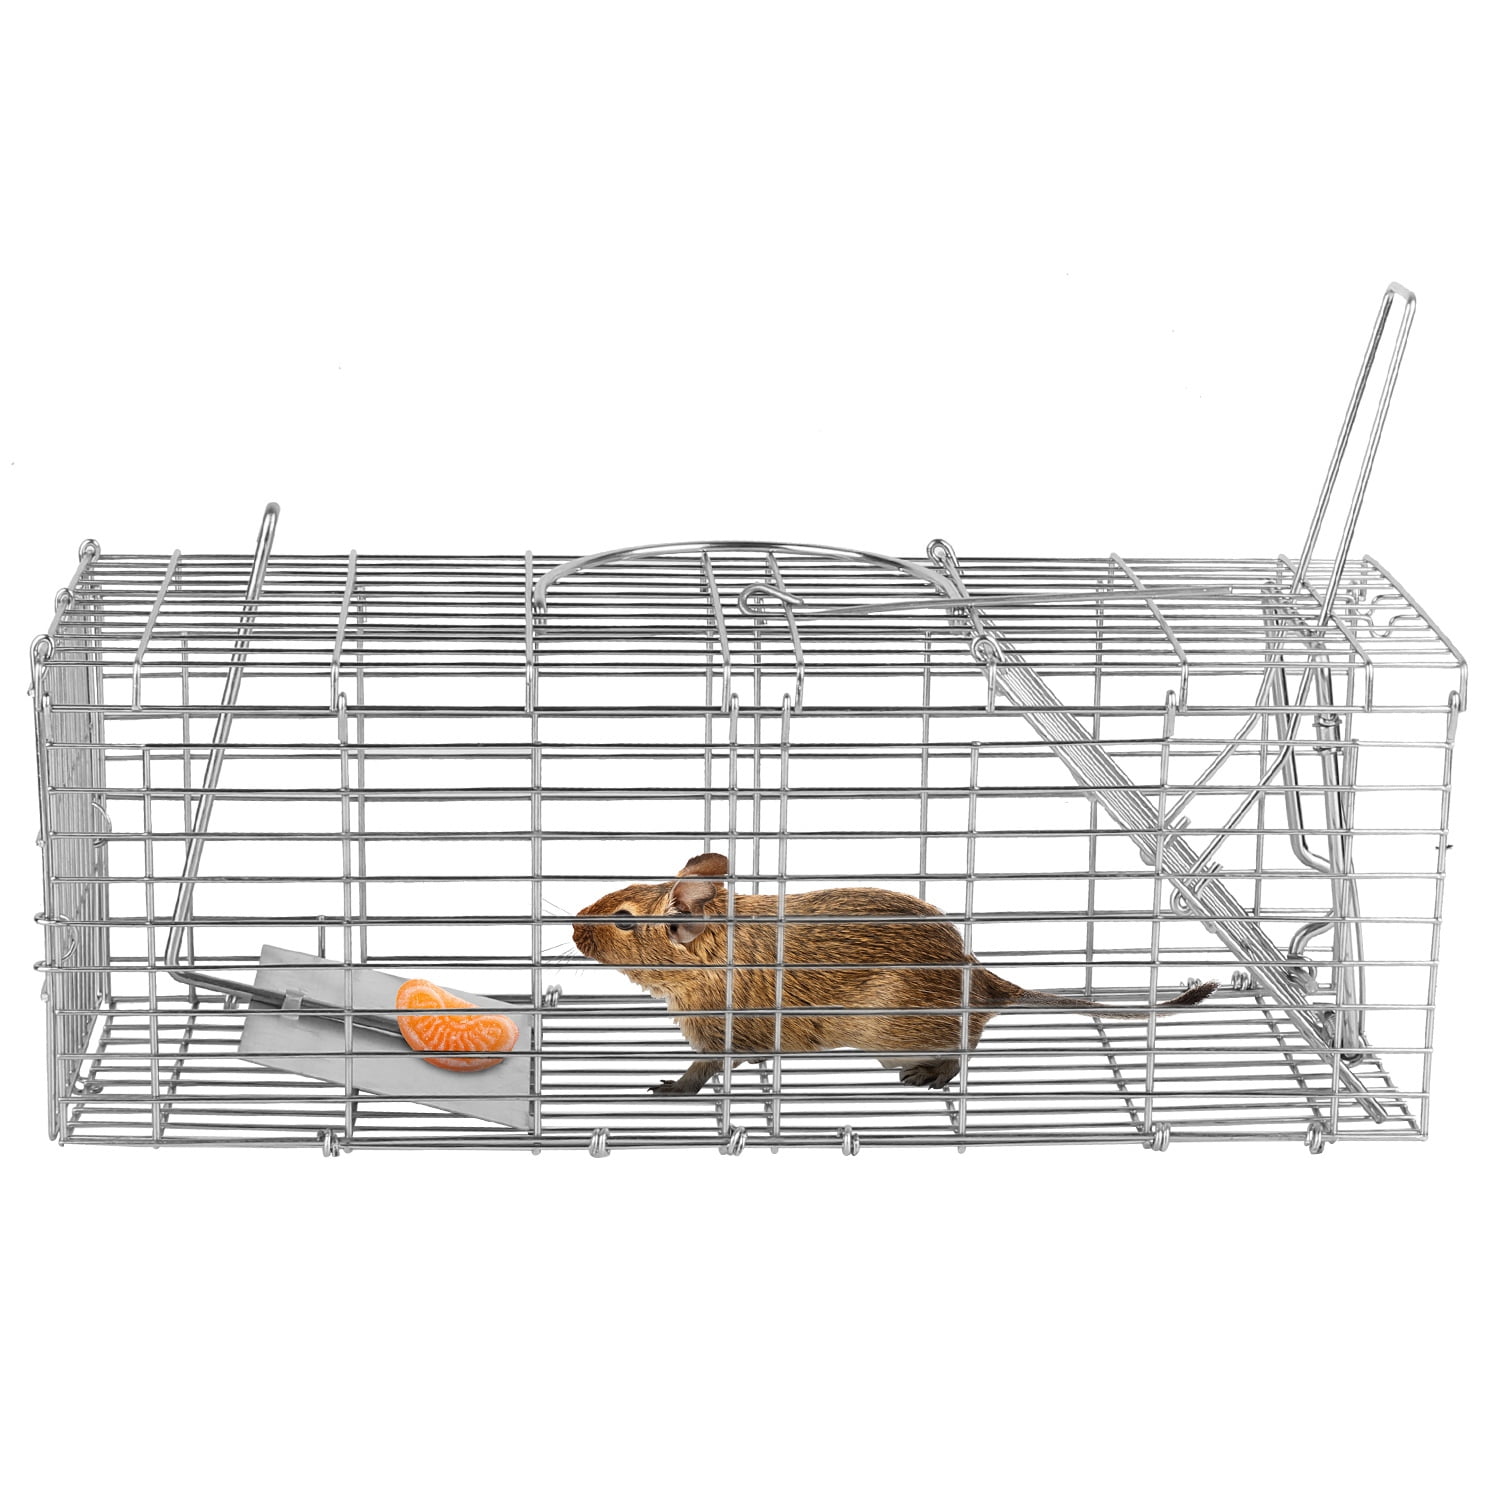 Loewten Mouse Mice Rat Rodent Animal Control Catch Bait Humane Live Traps  Hamster Cage, Mice Live Traps,Humane live mousetrap